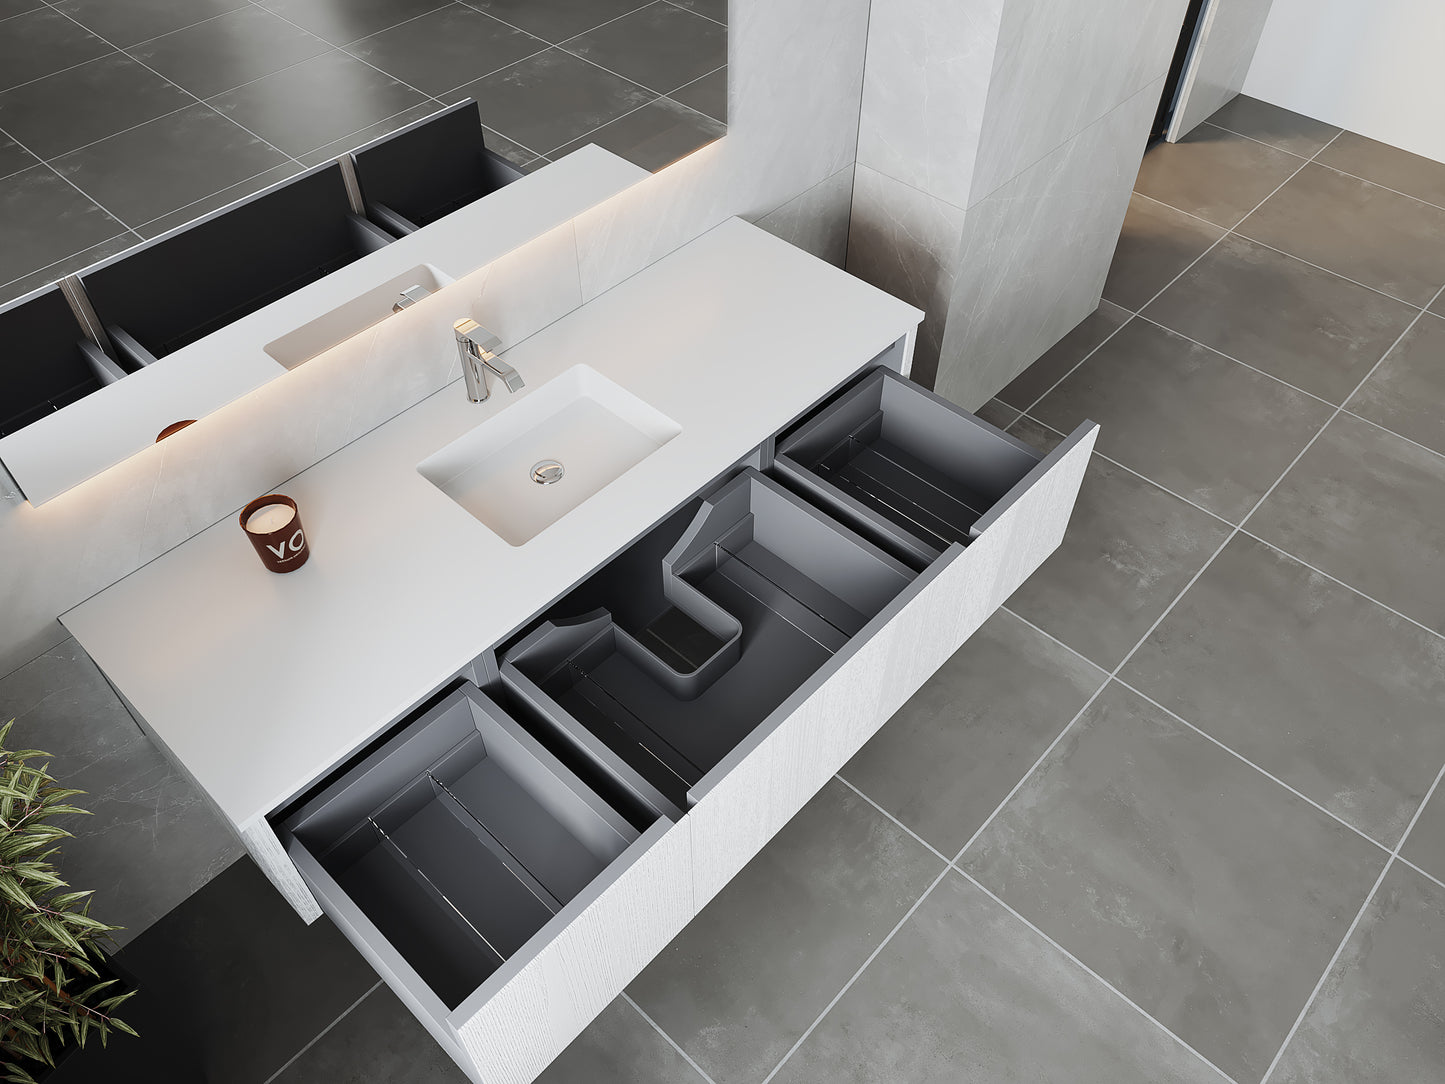 Legno 66" Alabaster White Bathroom Vanity with Matte White VIVA Stone Solid Surface Countertop